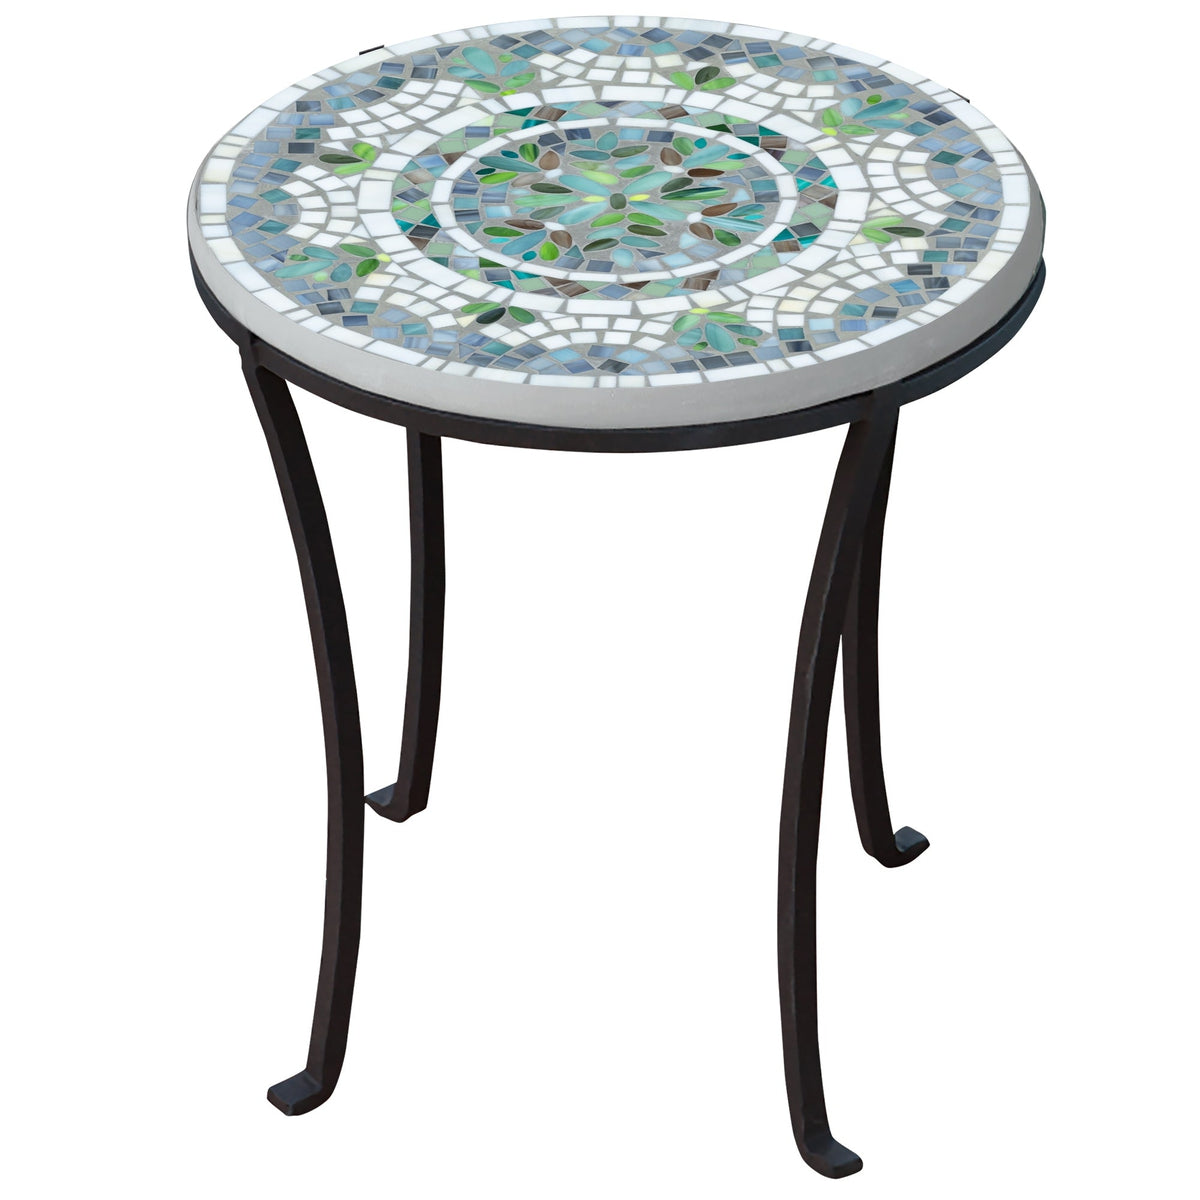 Miraval Mosaic Chaise Table